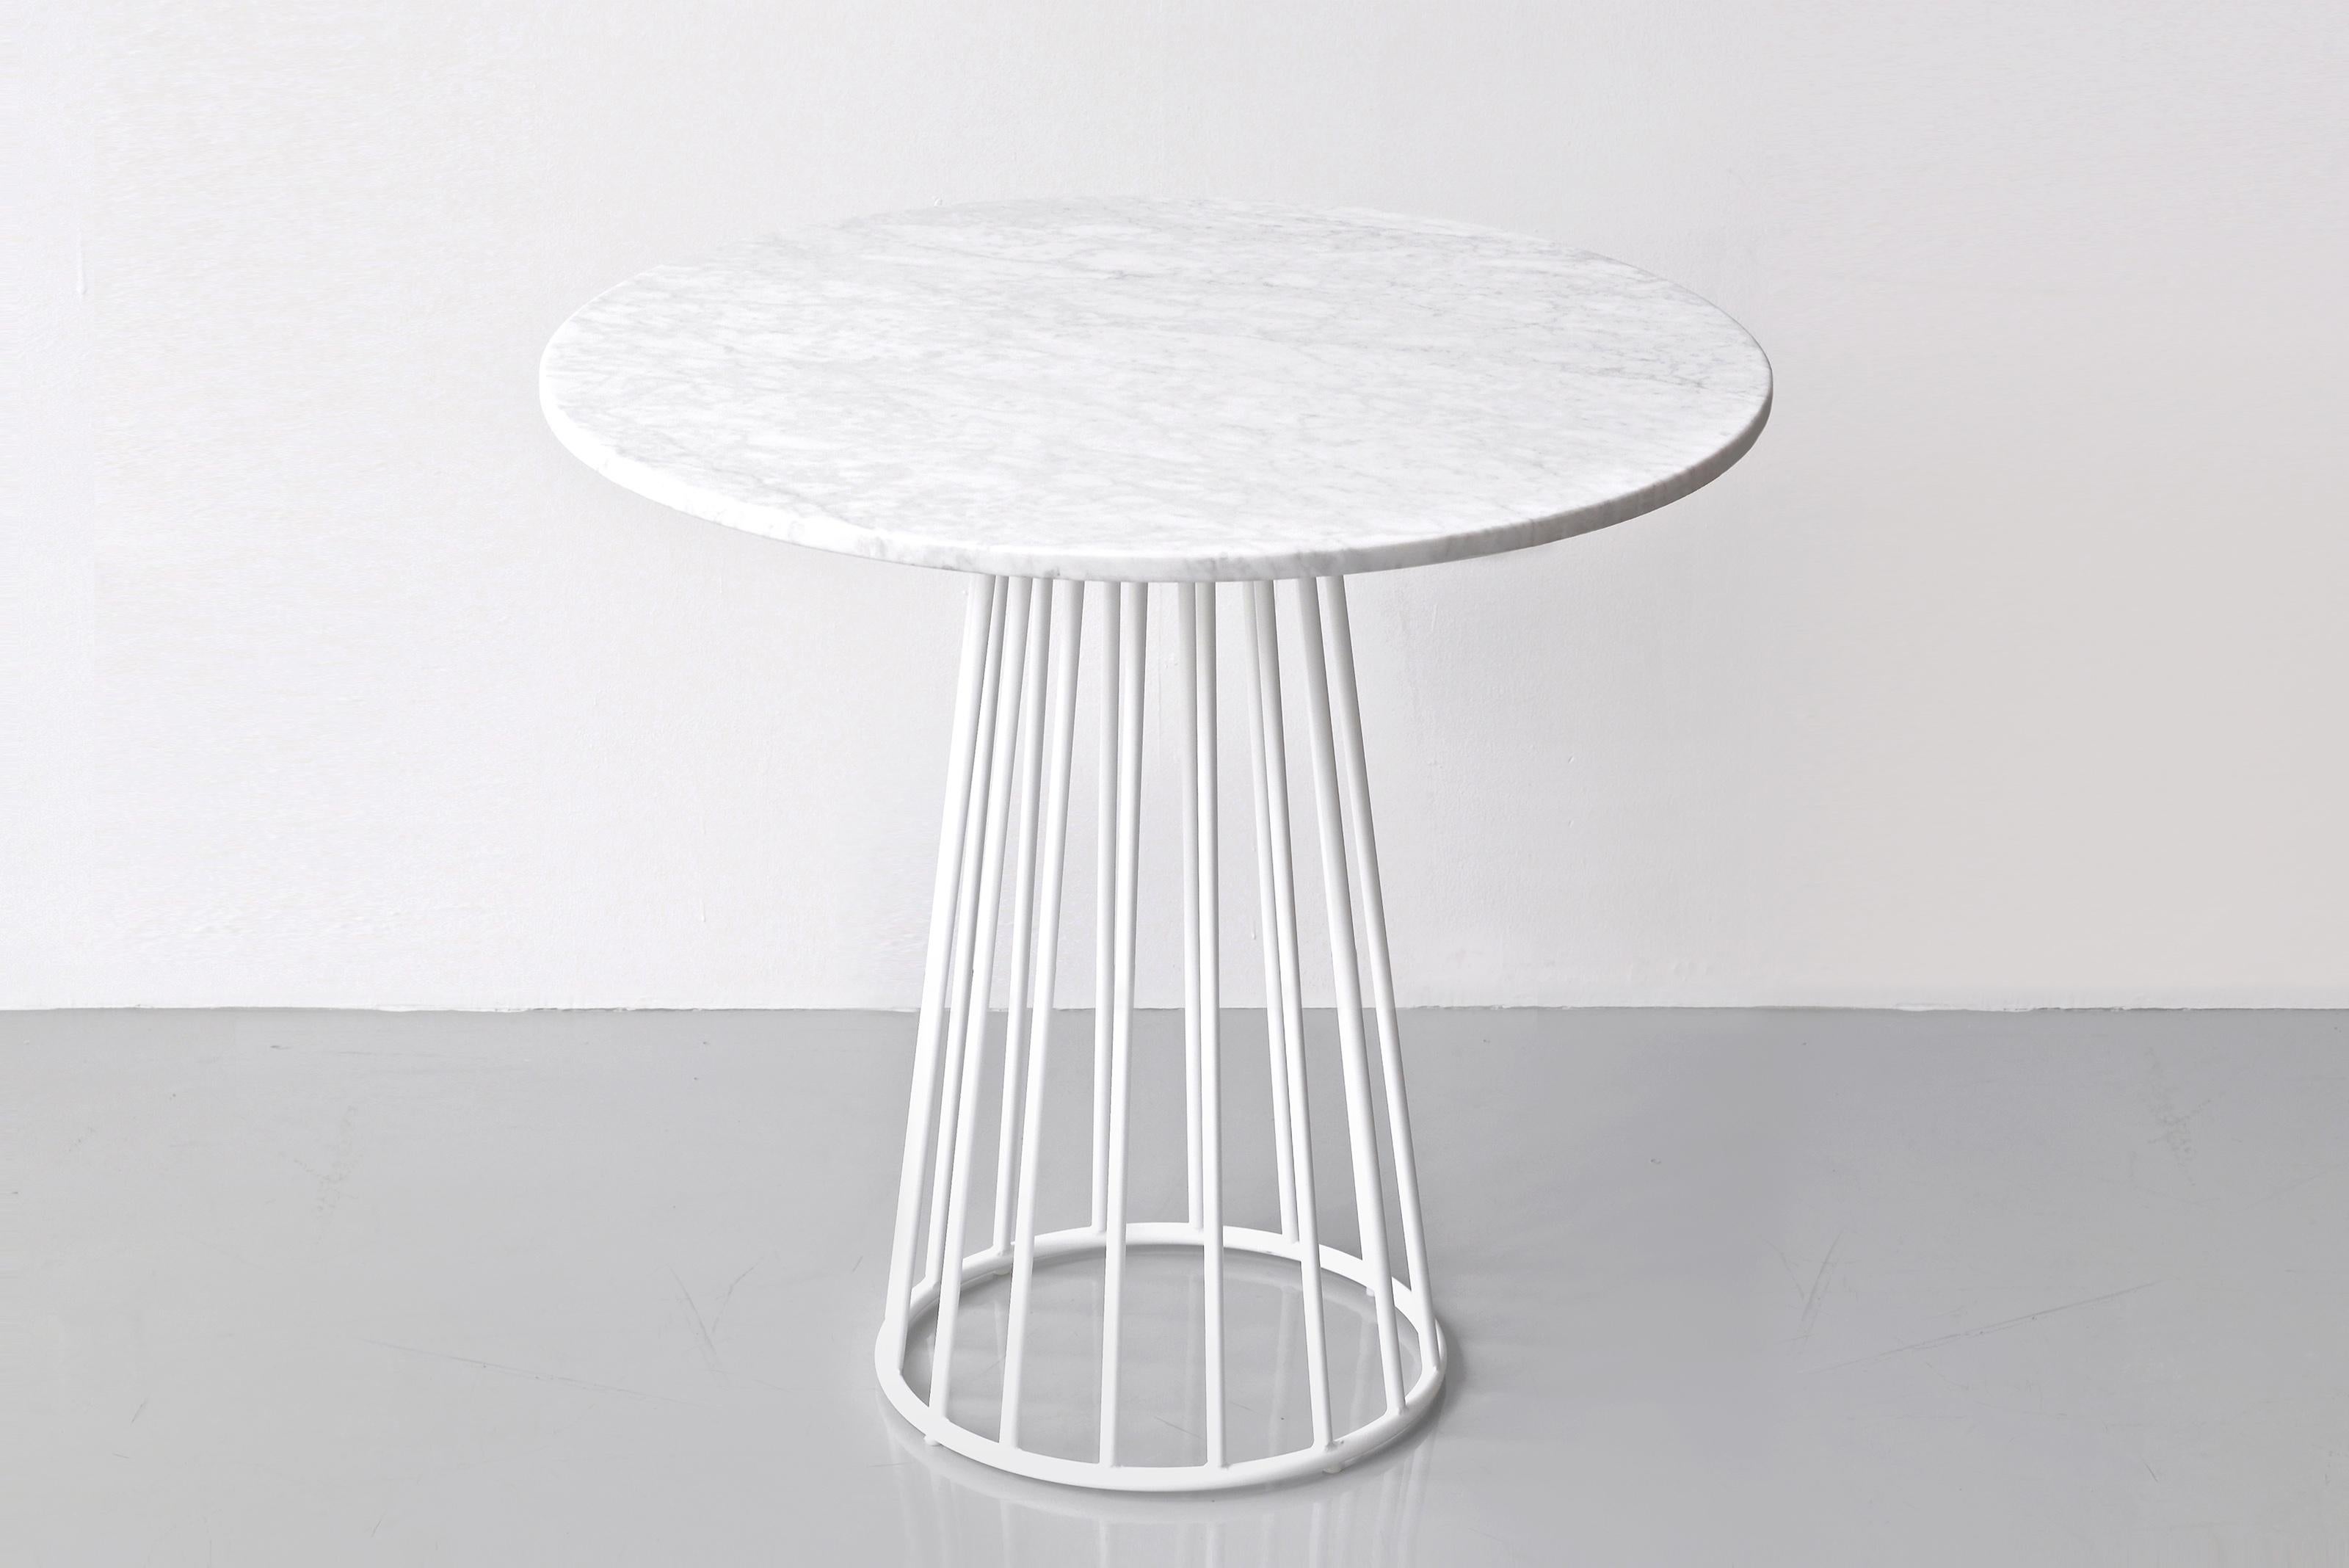 Wired Café Table by Phase Design
Dimensions: Ø 101.6 x H 73.7 cm. 
Materials: Powder-coated metal and white Carrara marble.

Solid steel bar with marble or solid wooden tops. Steel bar available in gloss or flat white and black powder coat, polished